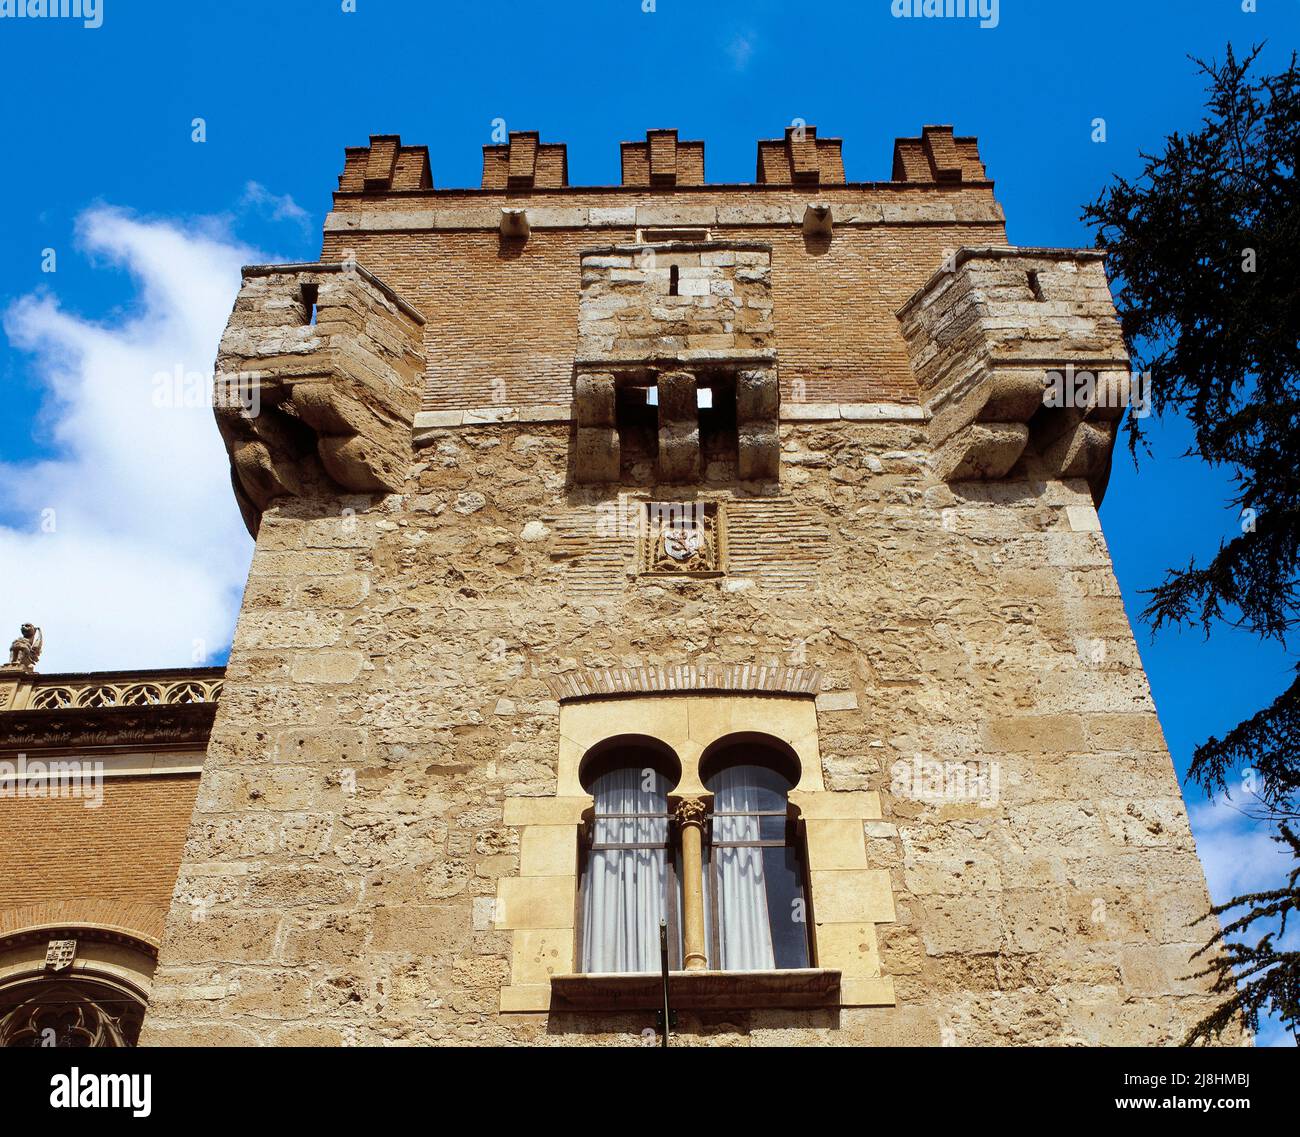 Spain, Community of Spain, Alcalá de Henares. Archbishop's Palace (Episcopal Palace). Architectural detail of the Tenorio Turret (Torreón de Tenorio), which owes its name to Pedro Tenorio, archbishop of Toledo between 1377 and 1399, who fortified the palac Stock Photo